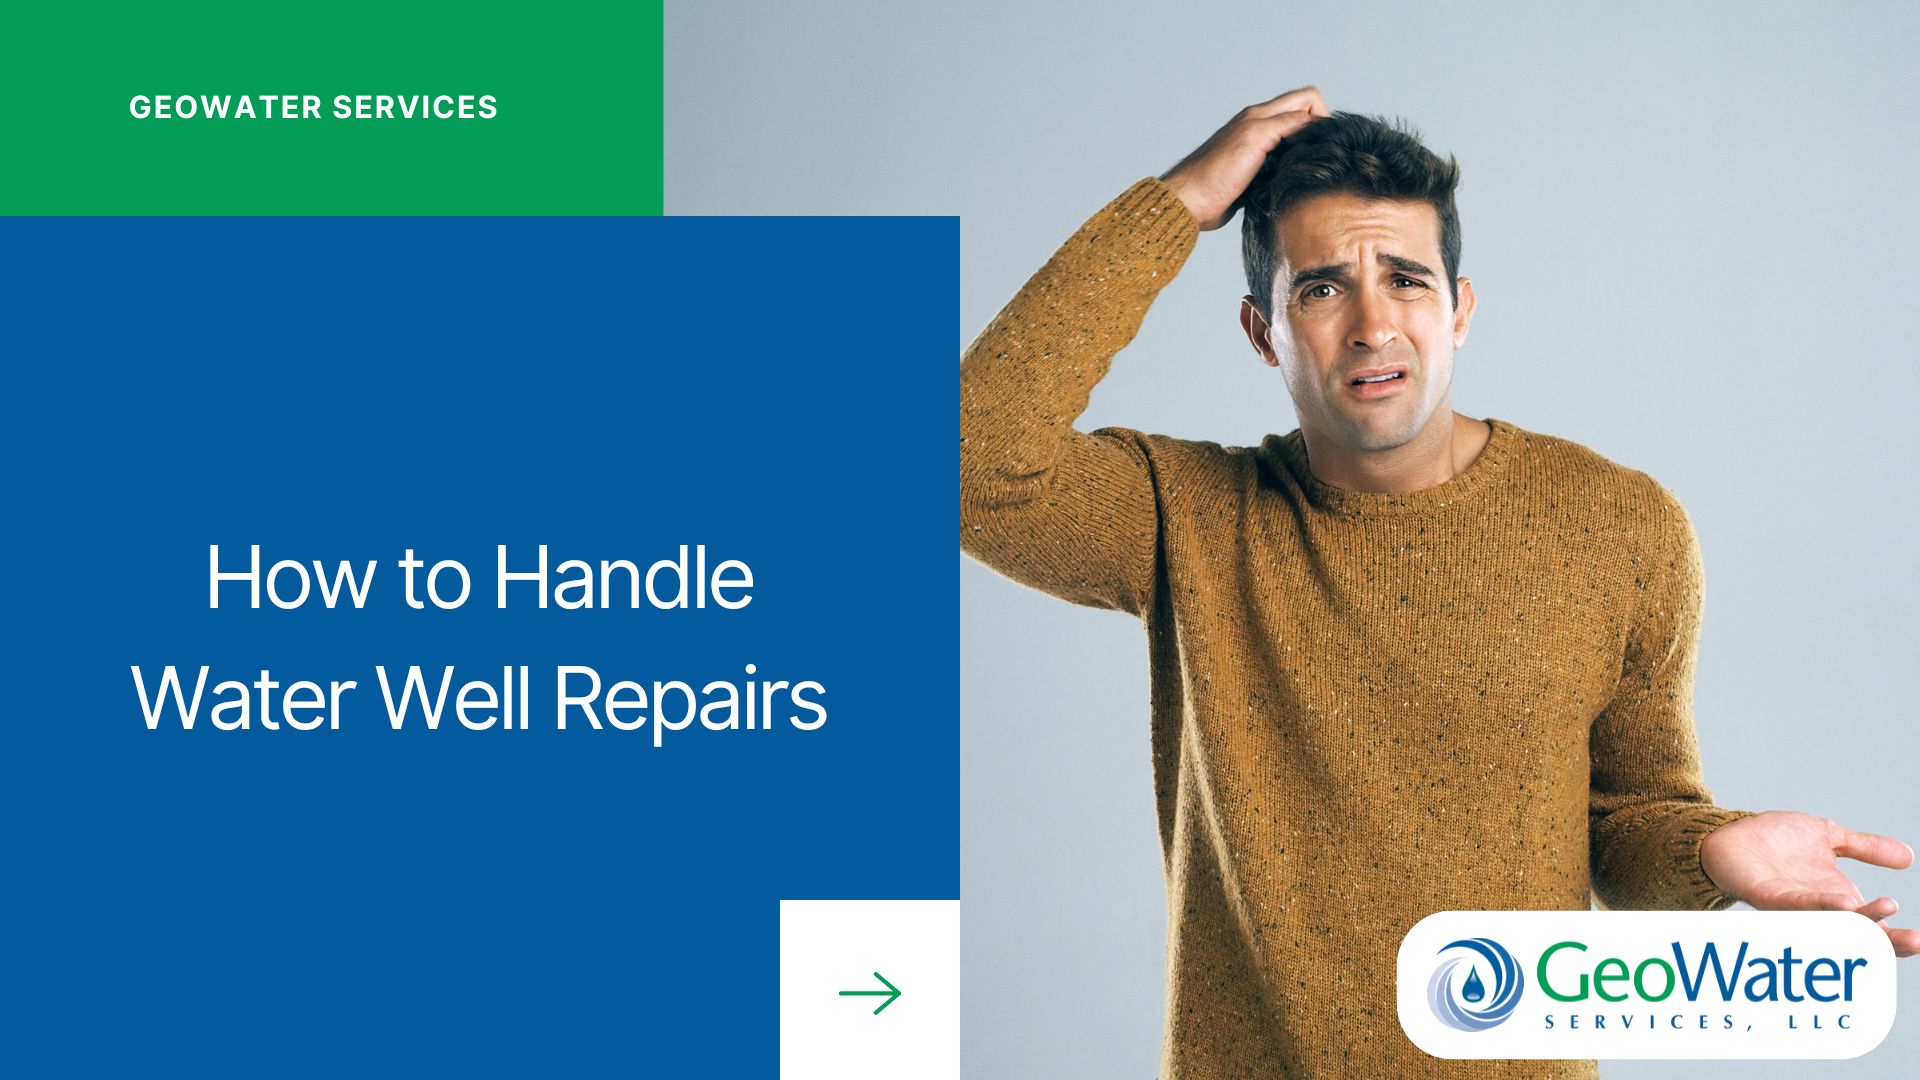 How to Handle Water Well Repairs